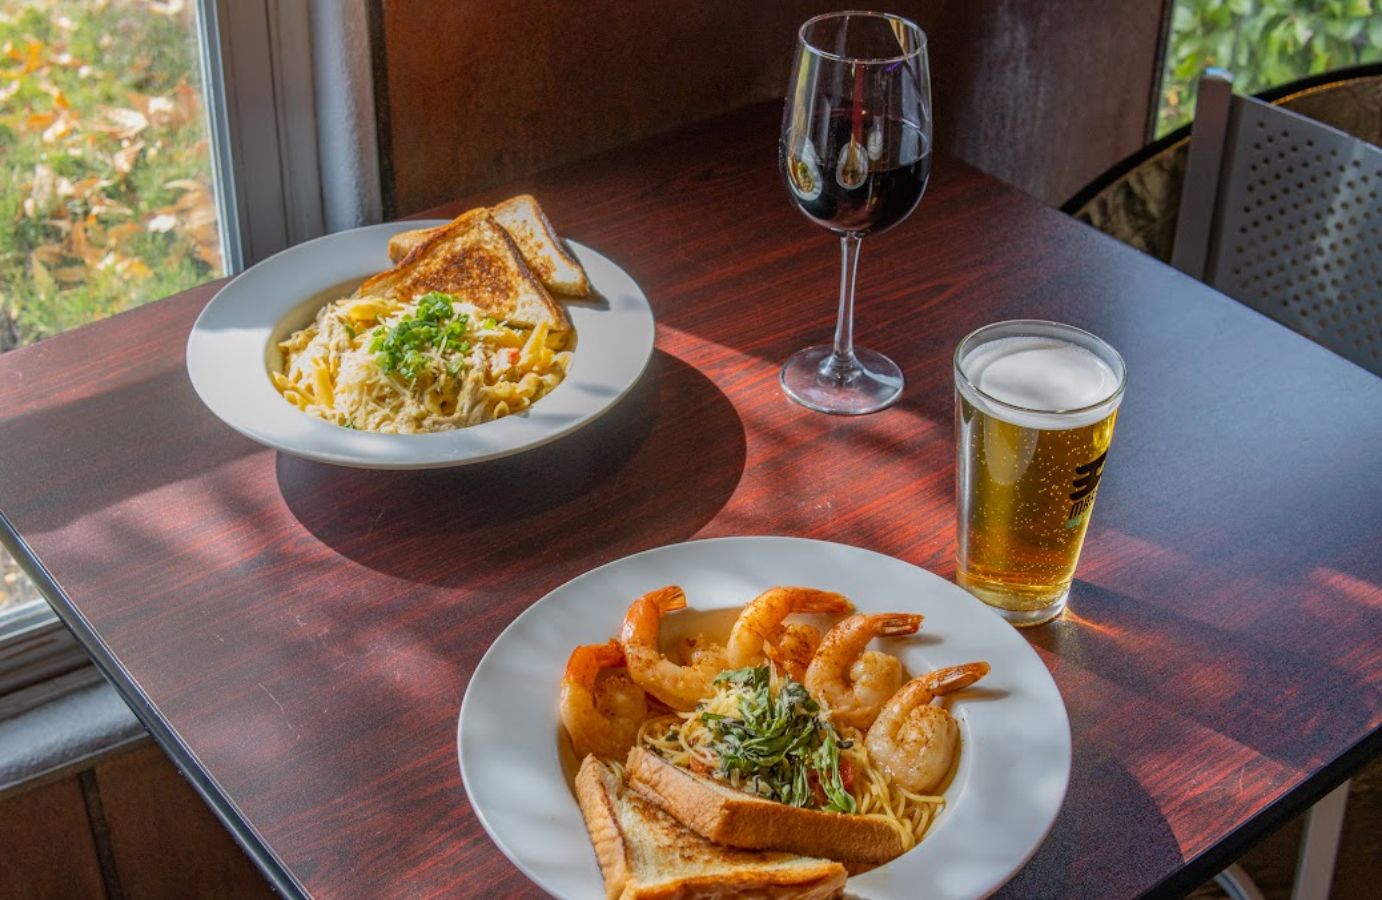 Pasta dish plate and Shrimp Scampi plate served with wine and beer